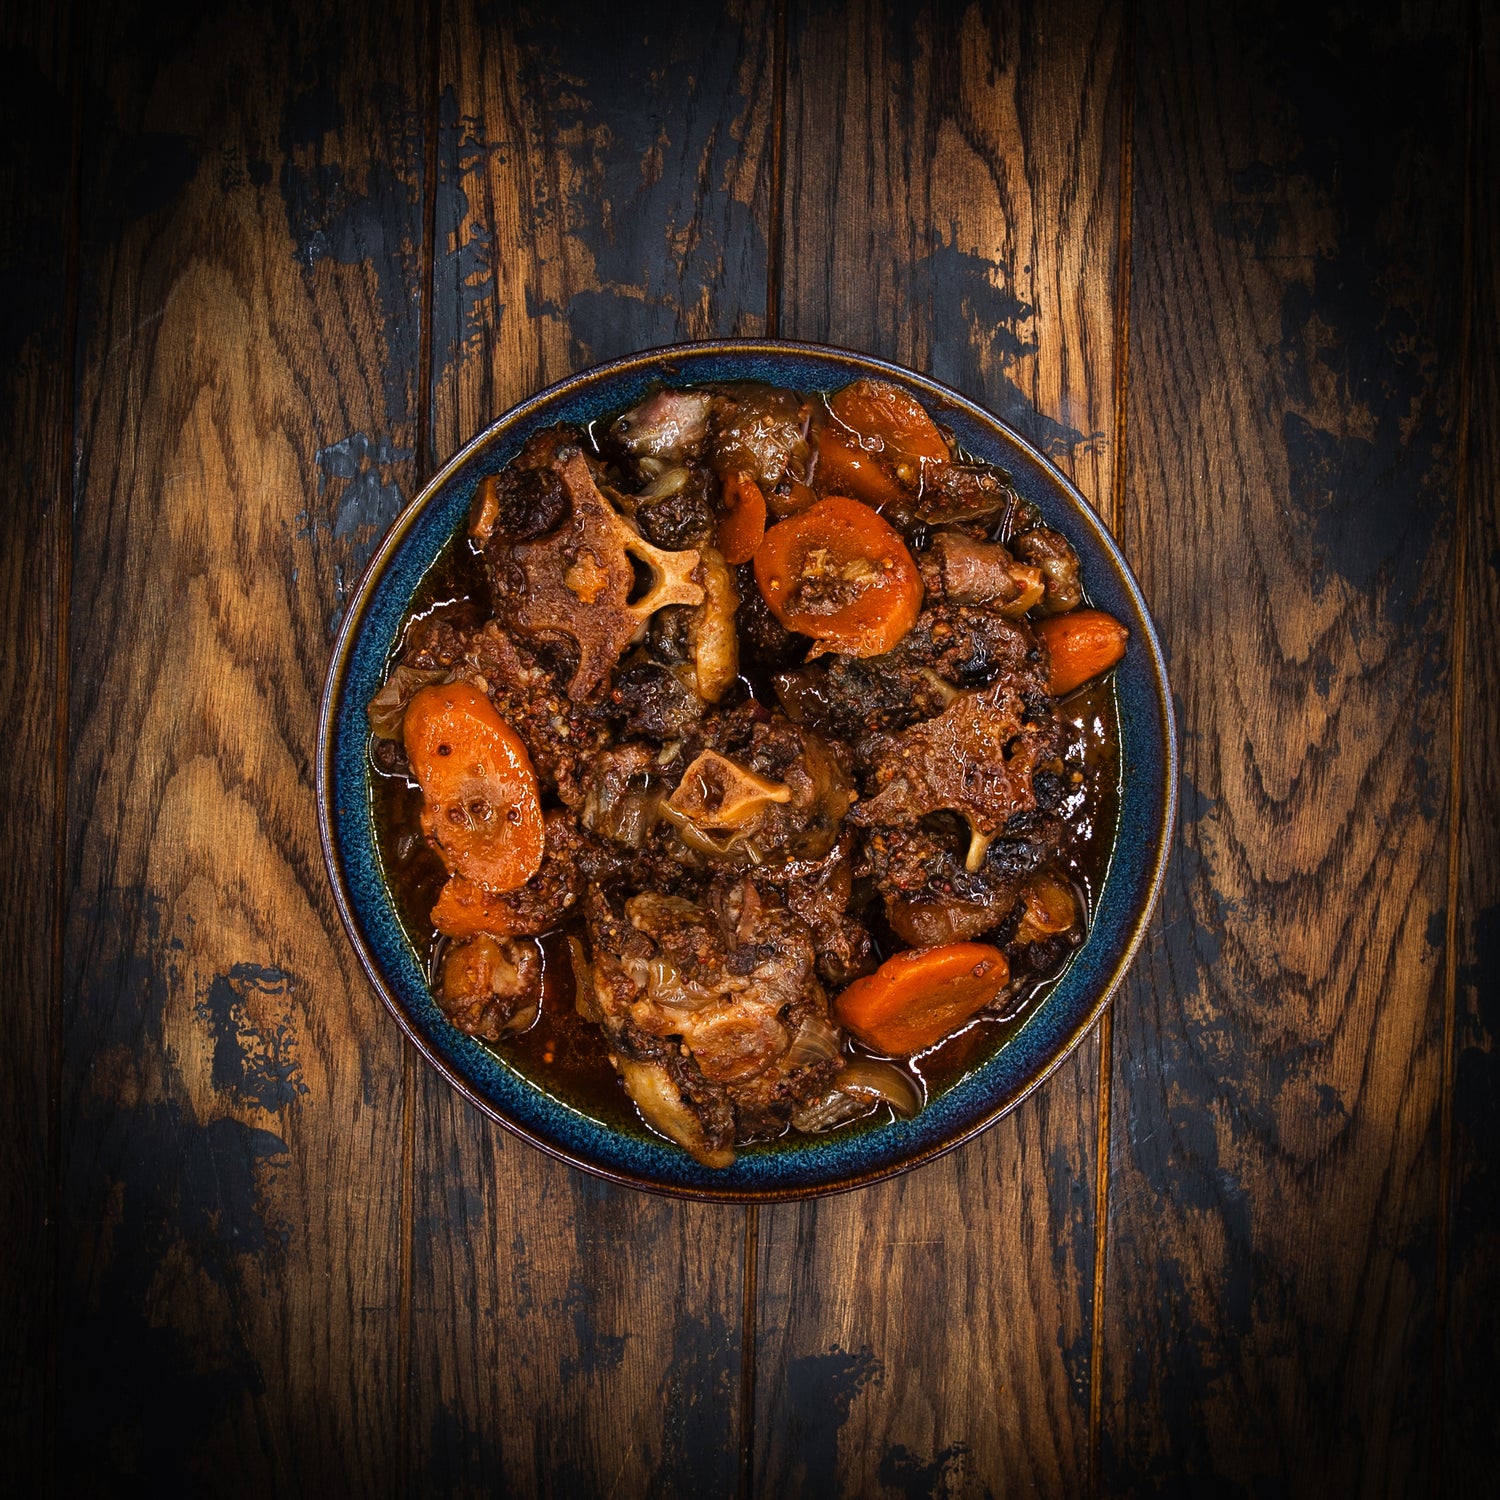 Smoked oxtail stew